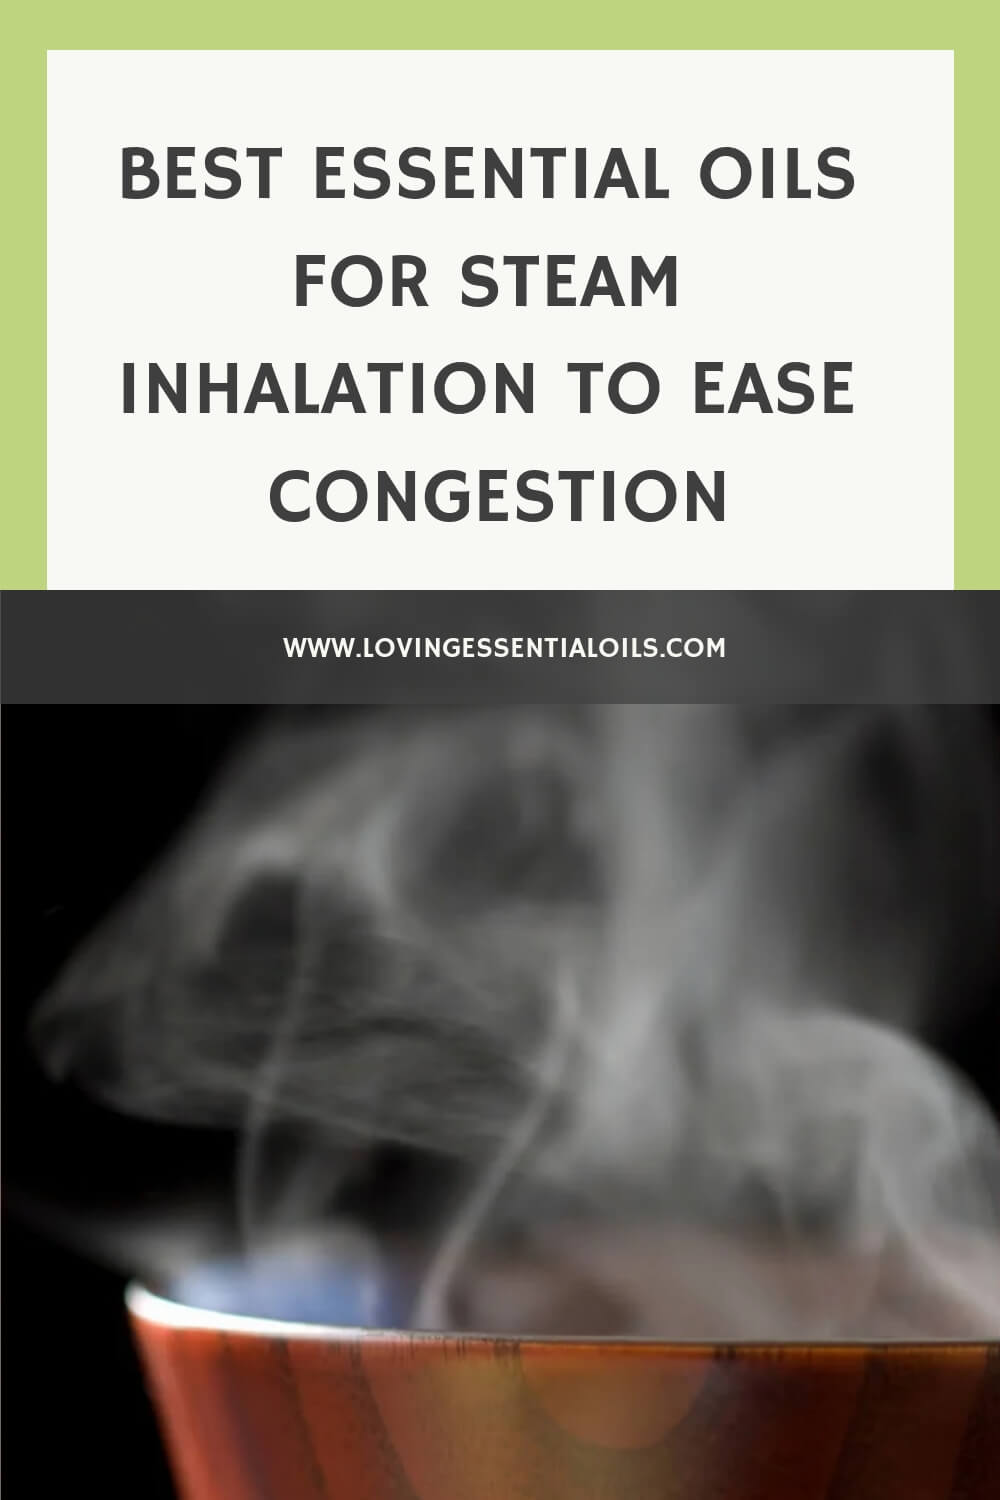 Best Essential Oils For Steam Inhalation to Ease Congestion by Loving Essential Oils